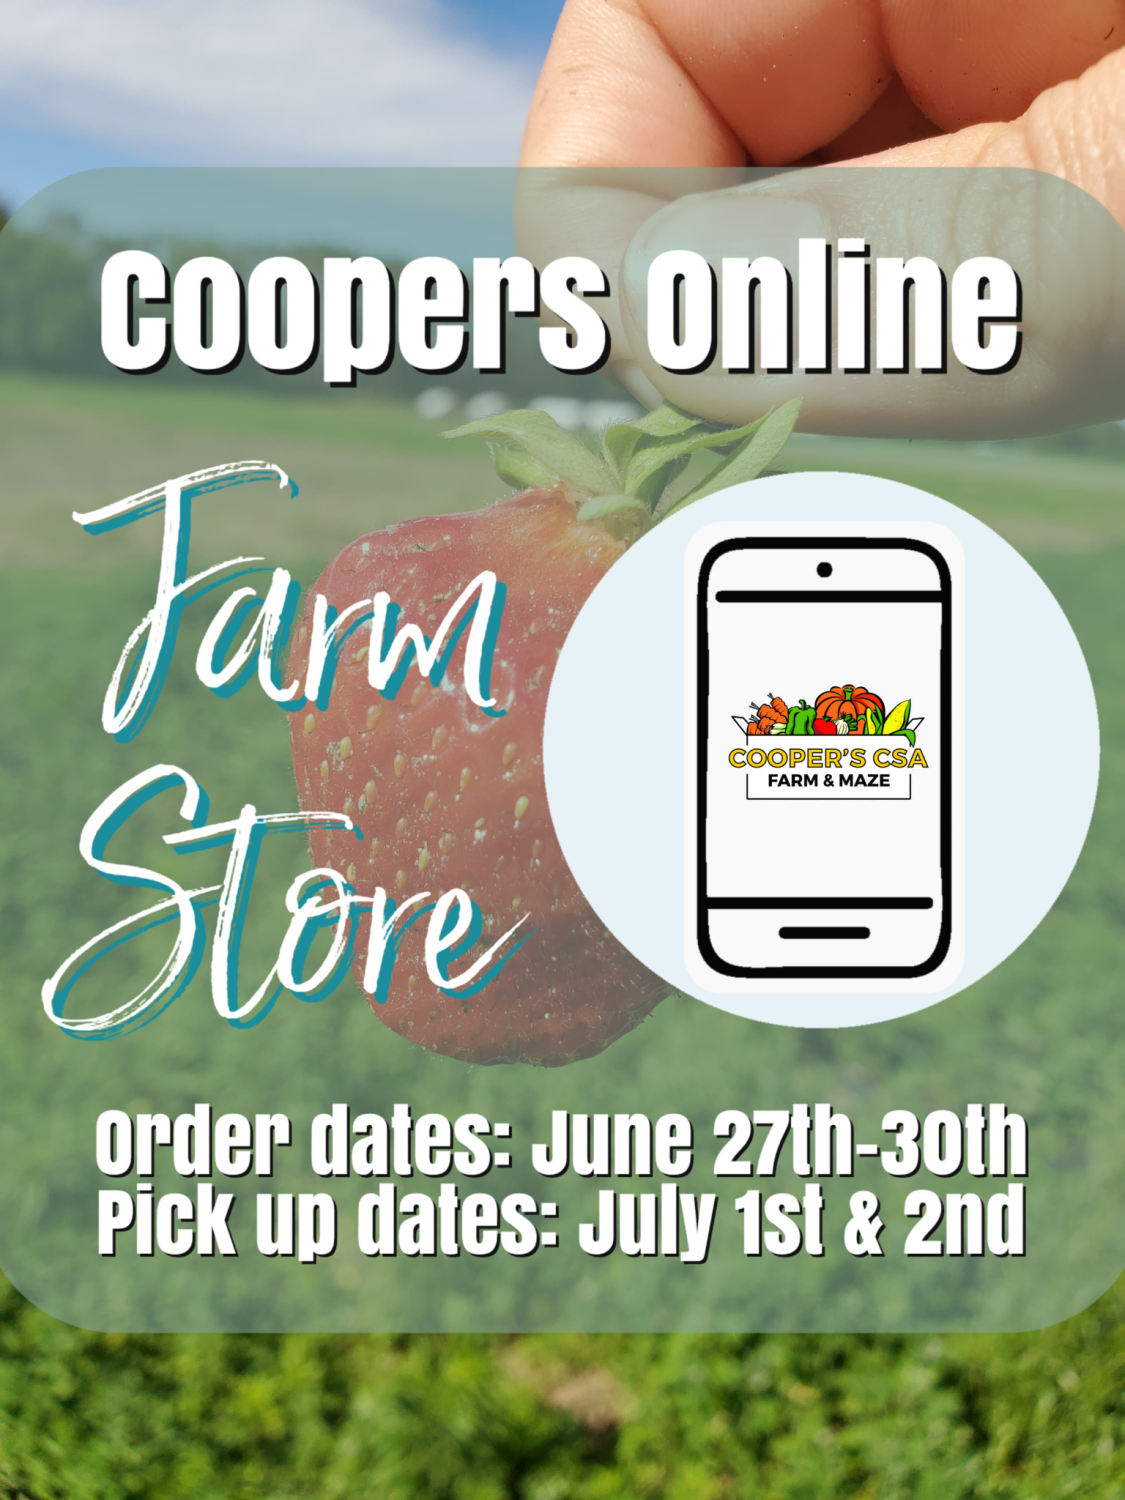 Coopers Online Farm Stand- Order week June 27th-July 2nd